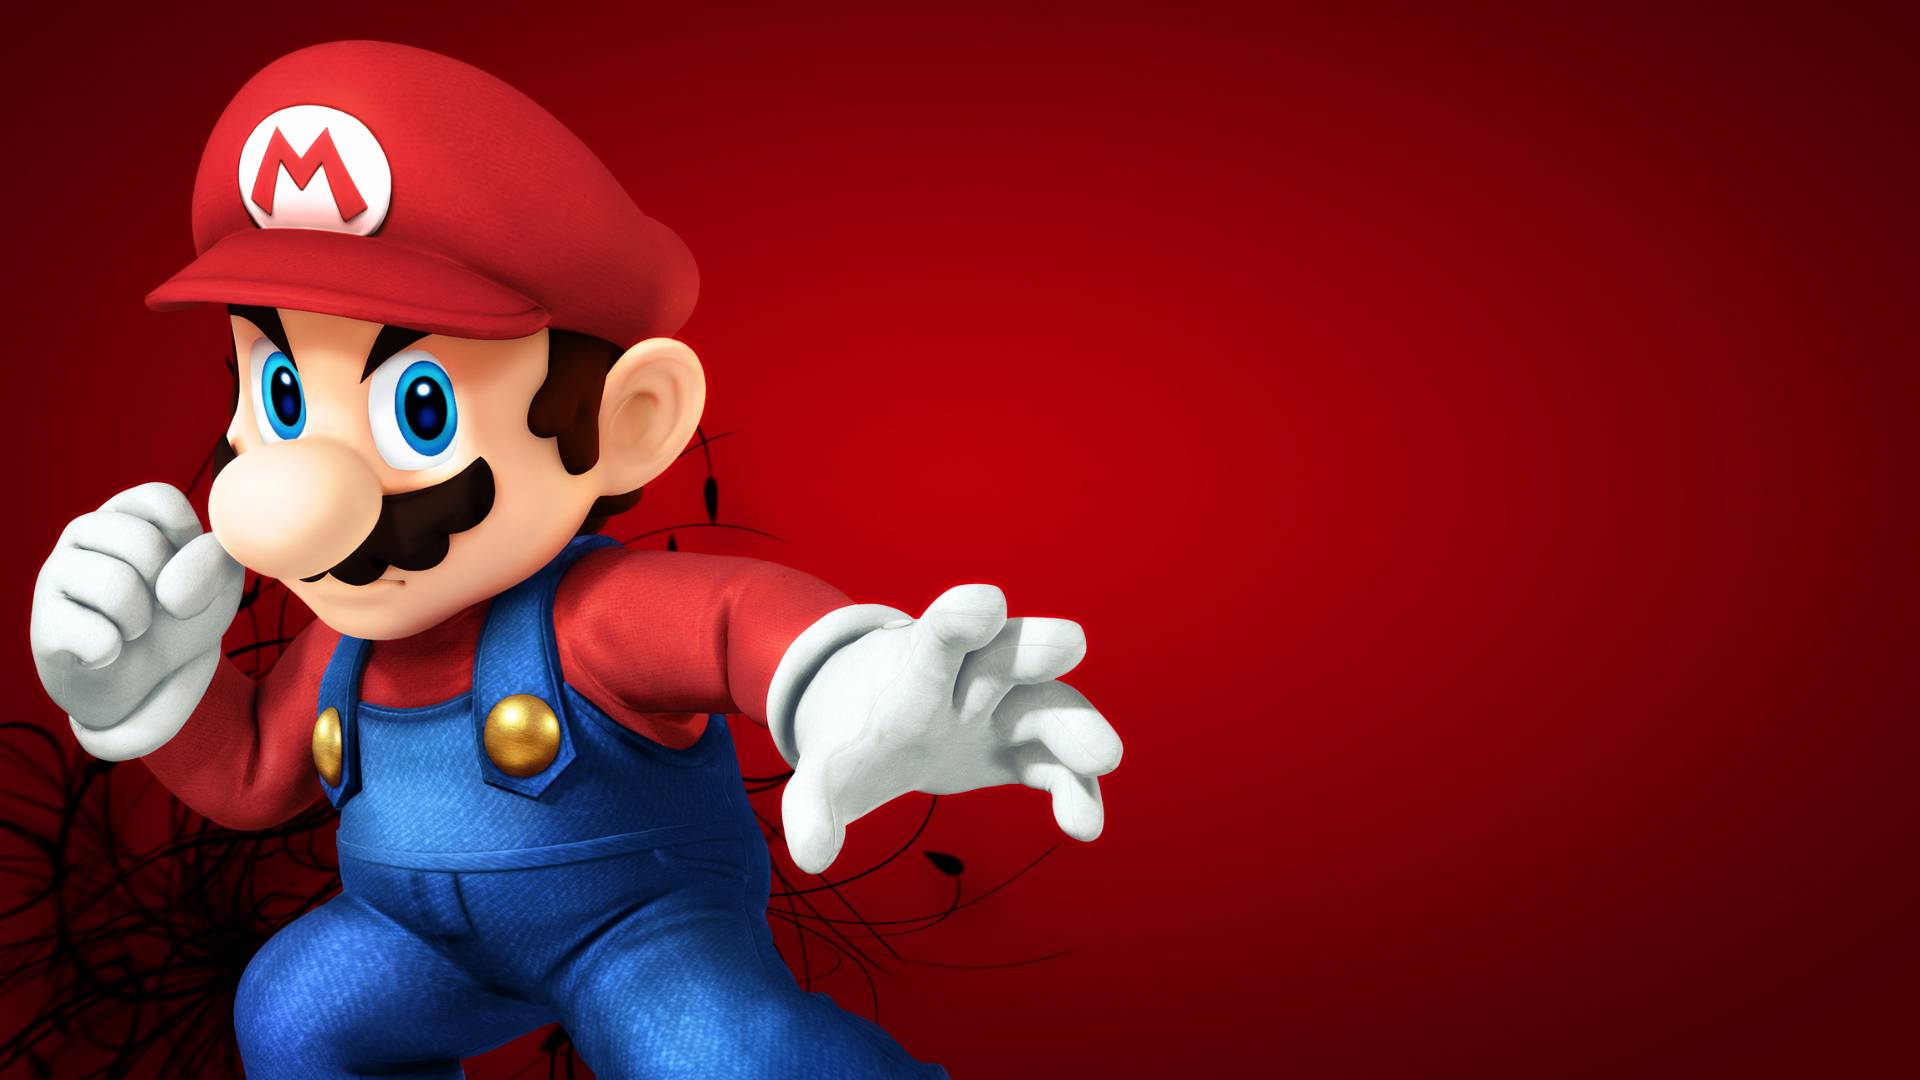 Laptop Mario Bros Wallpaper, Wallpaper and Picture for PC & Mac